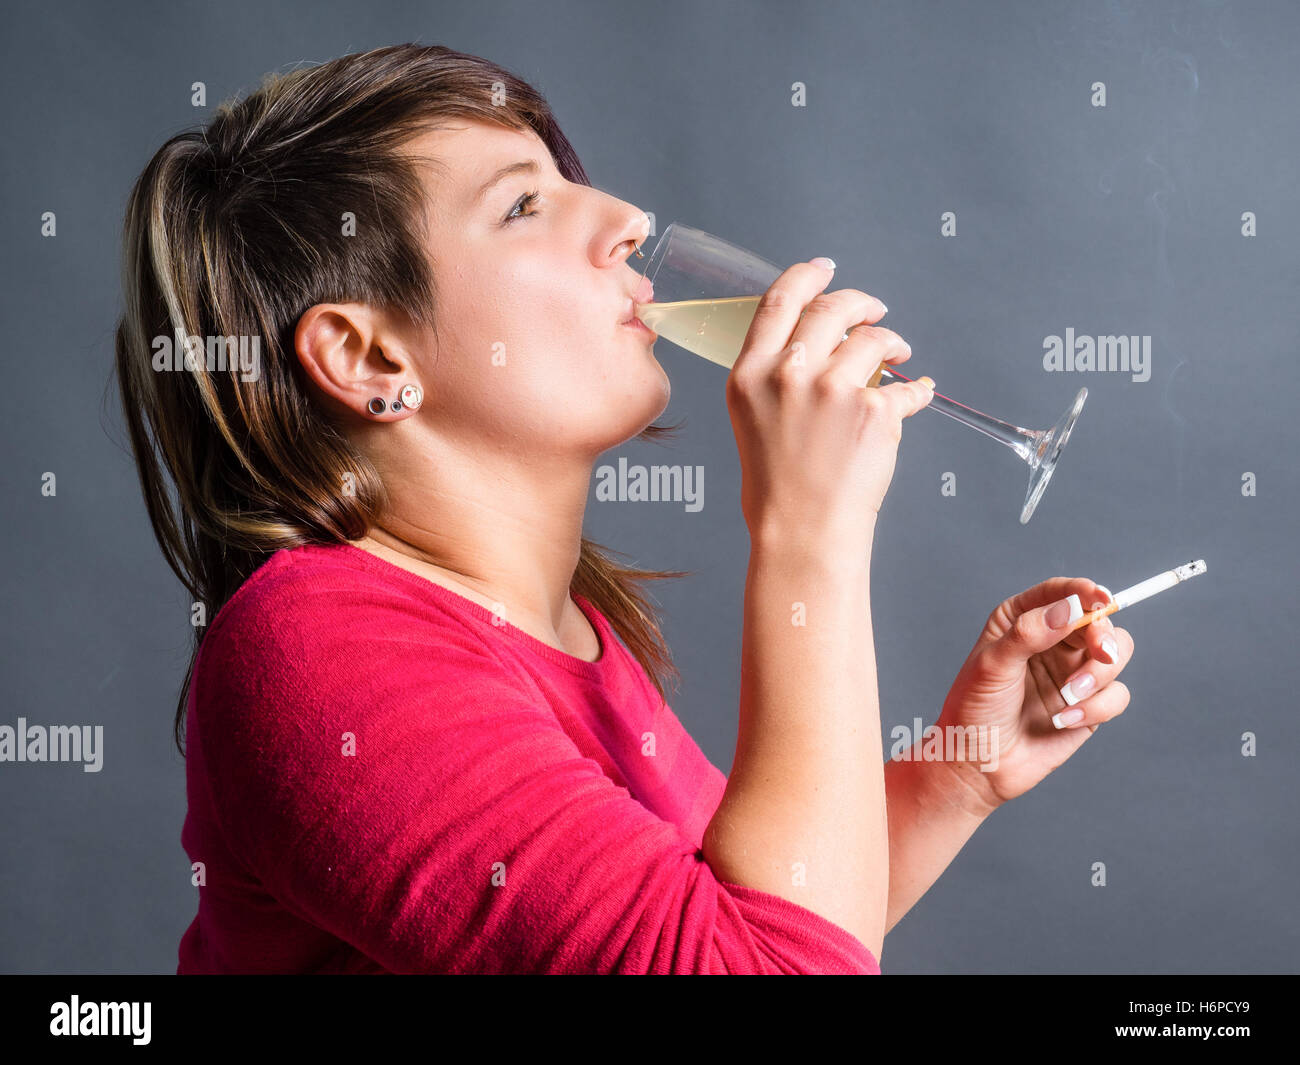 pregnant woman is drinking Alcohol. Stock Photo